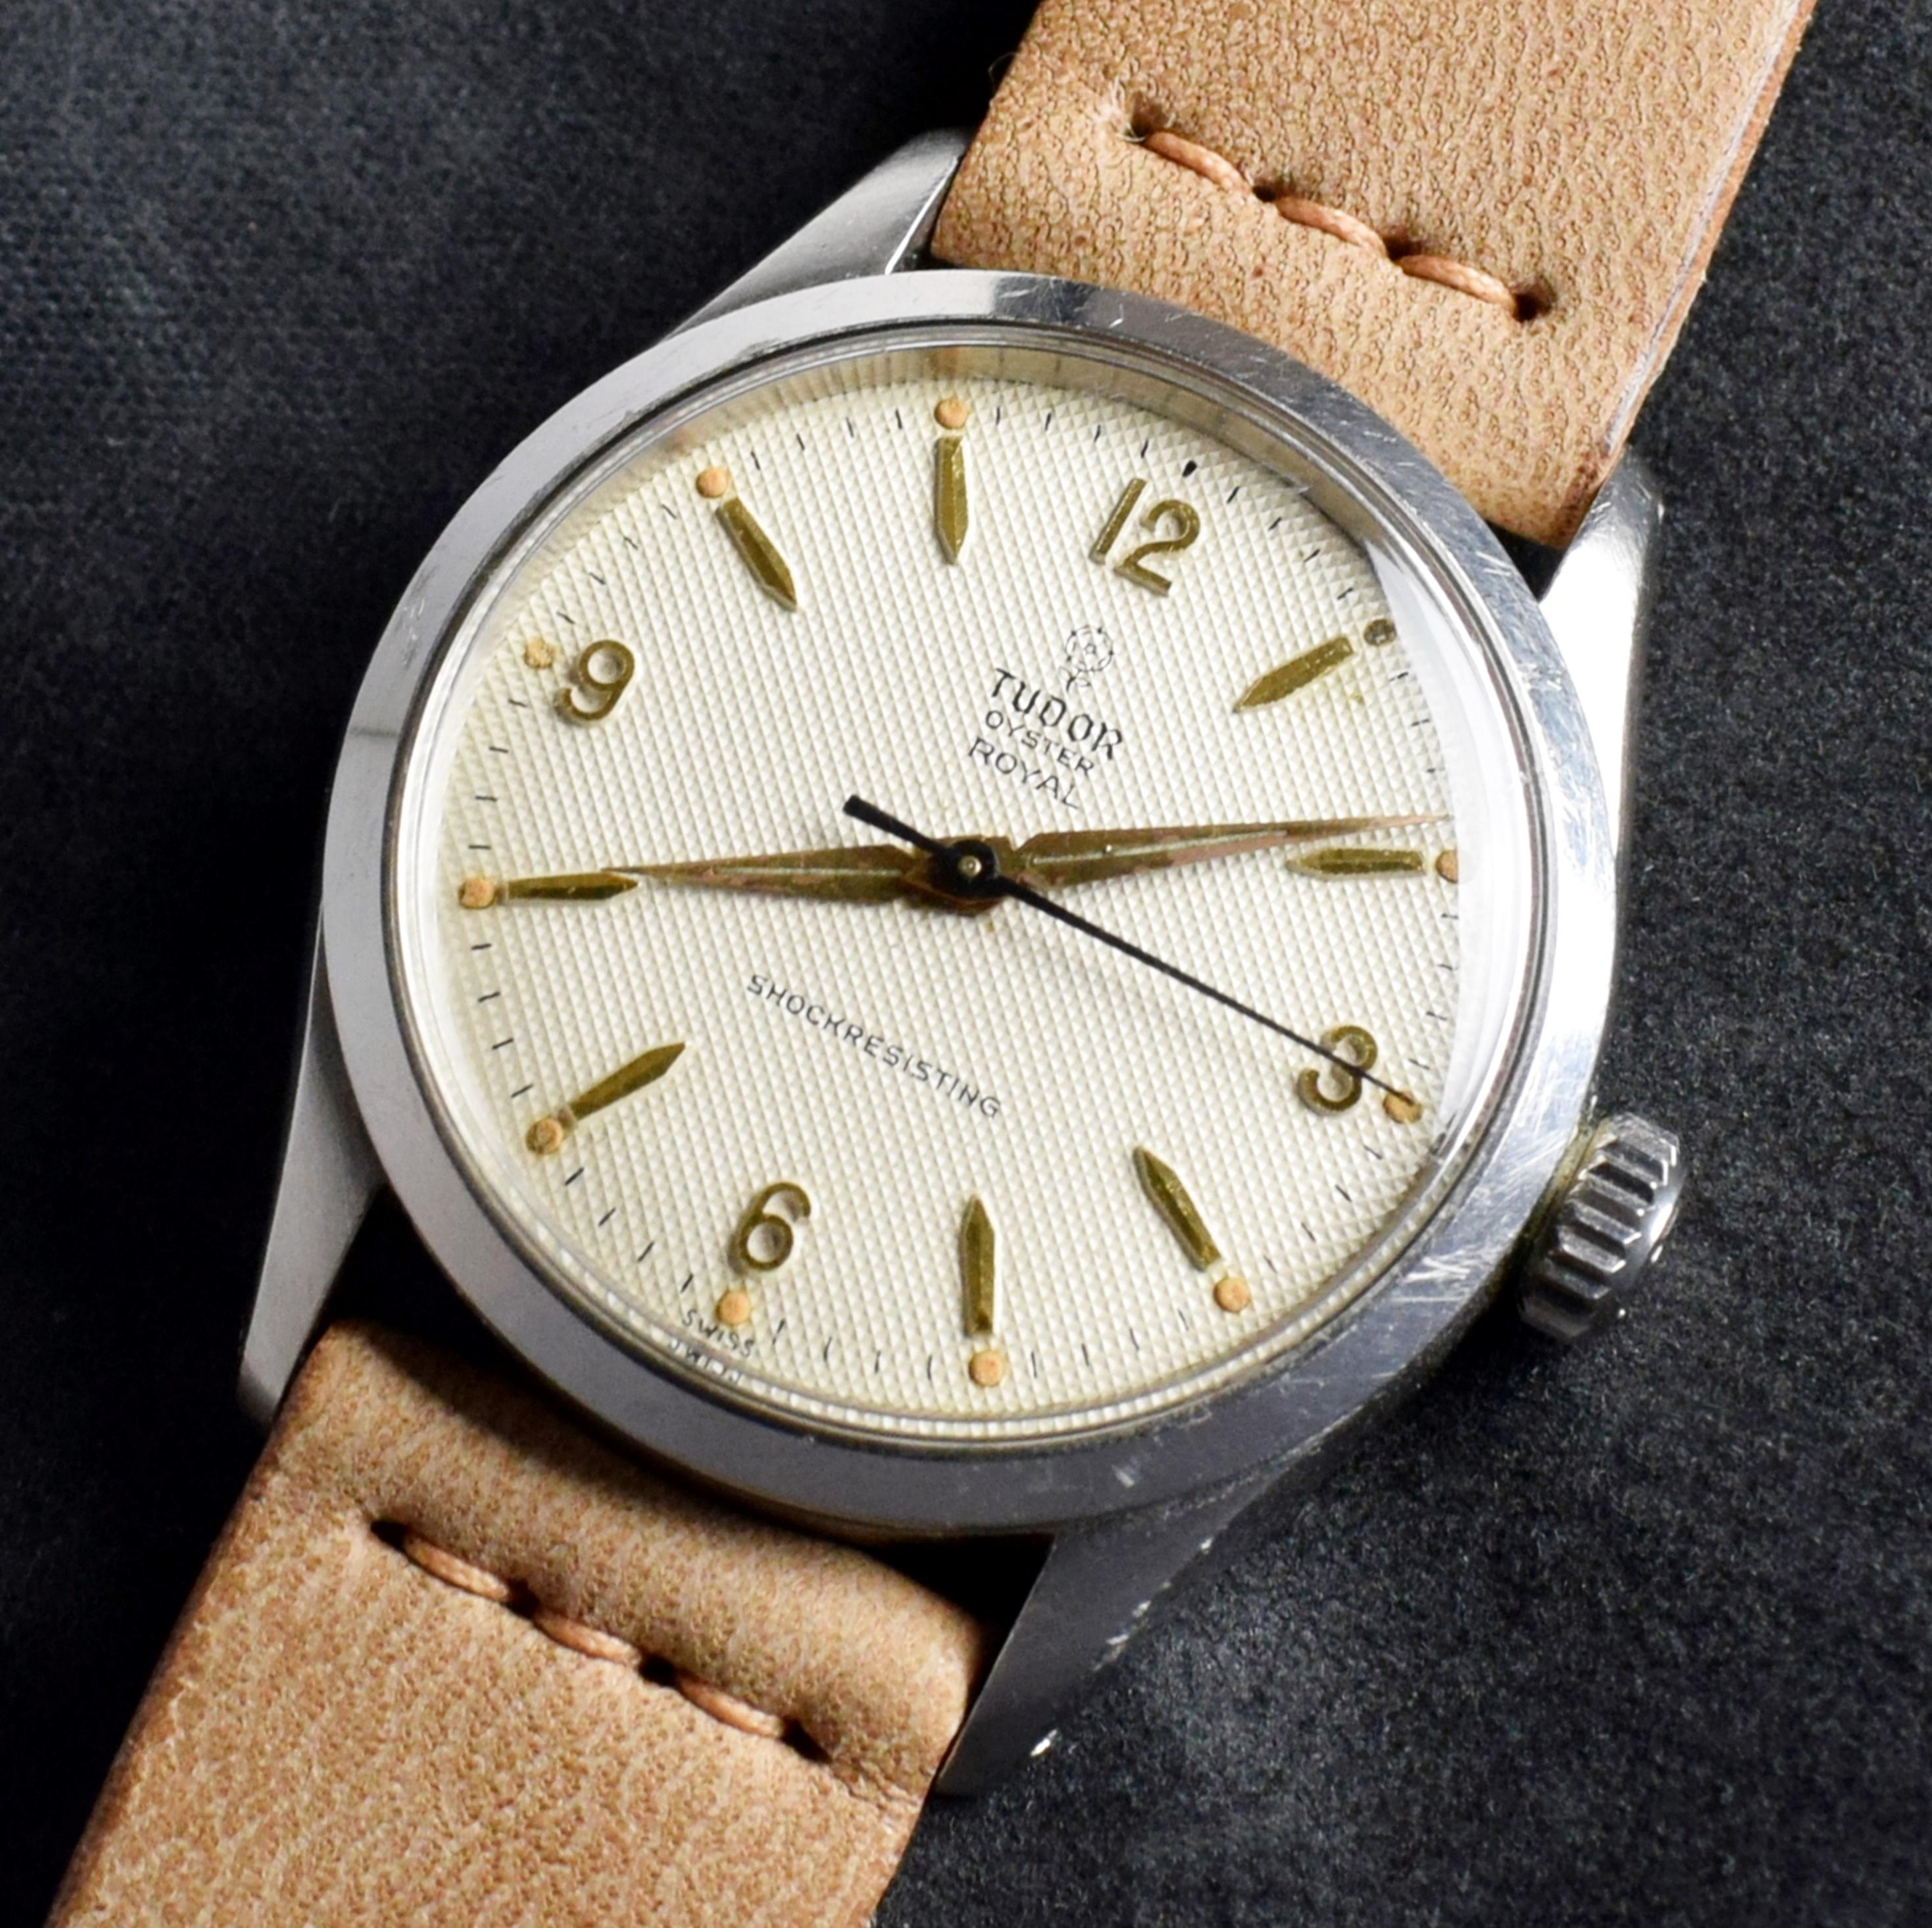 Brand: Vintage Tudor
Model: 7934
Year: ~late 50’s -early 60’s
Serial number: N/A
Reference: C03598
Case: 34mm without crown; Show sign of wear with slight polish from previous; inner case back stamped 6426
Dial: Excellent Aged yet Clean Condition